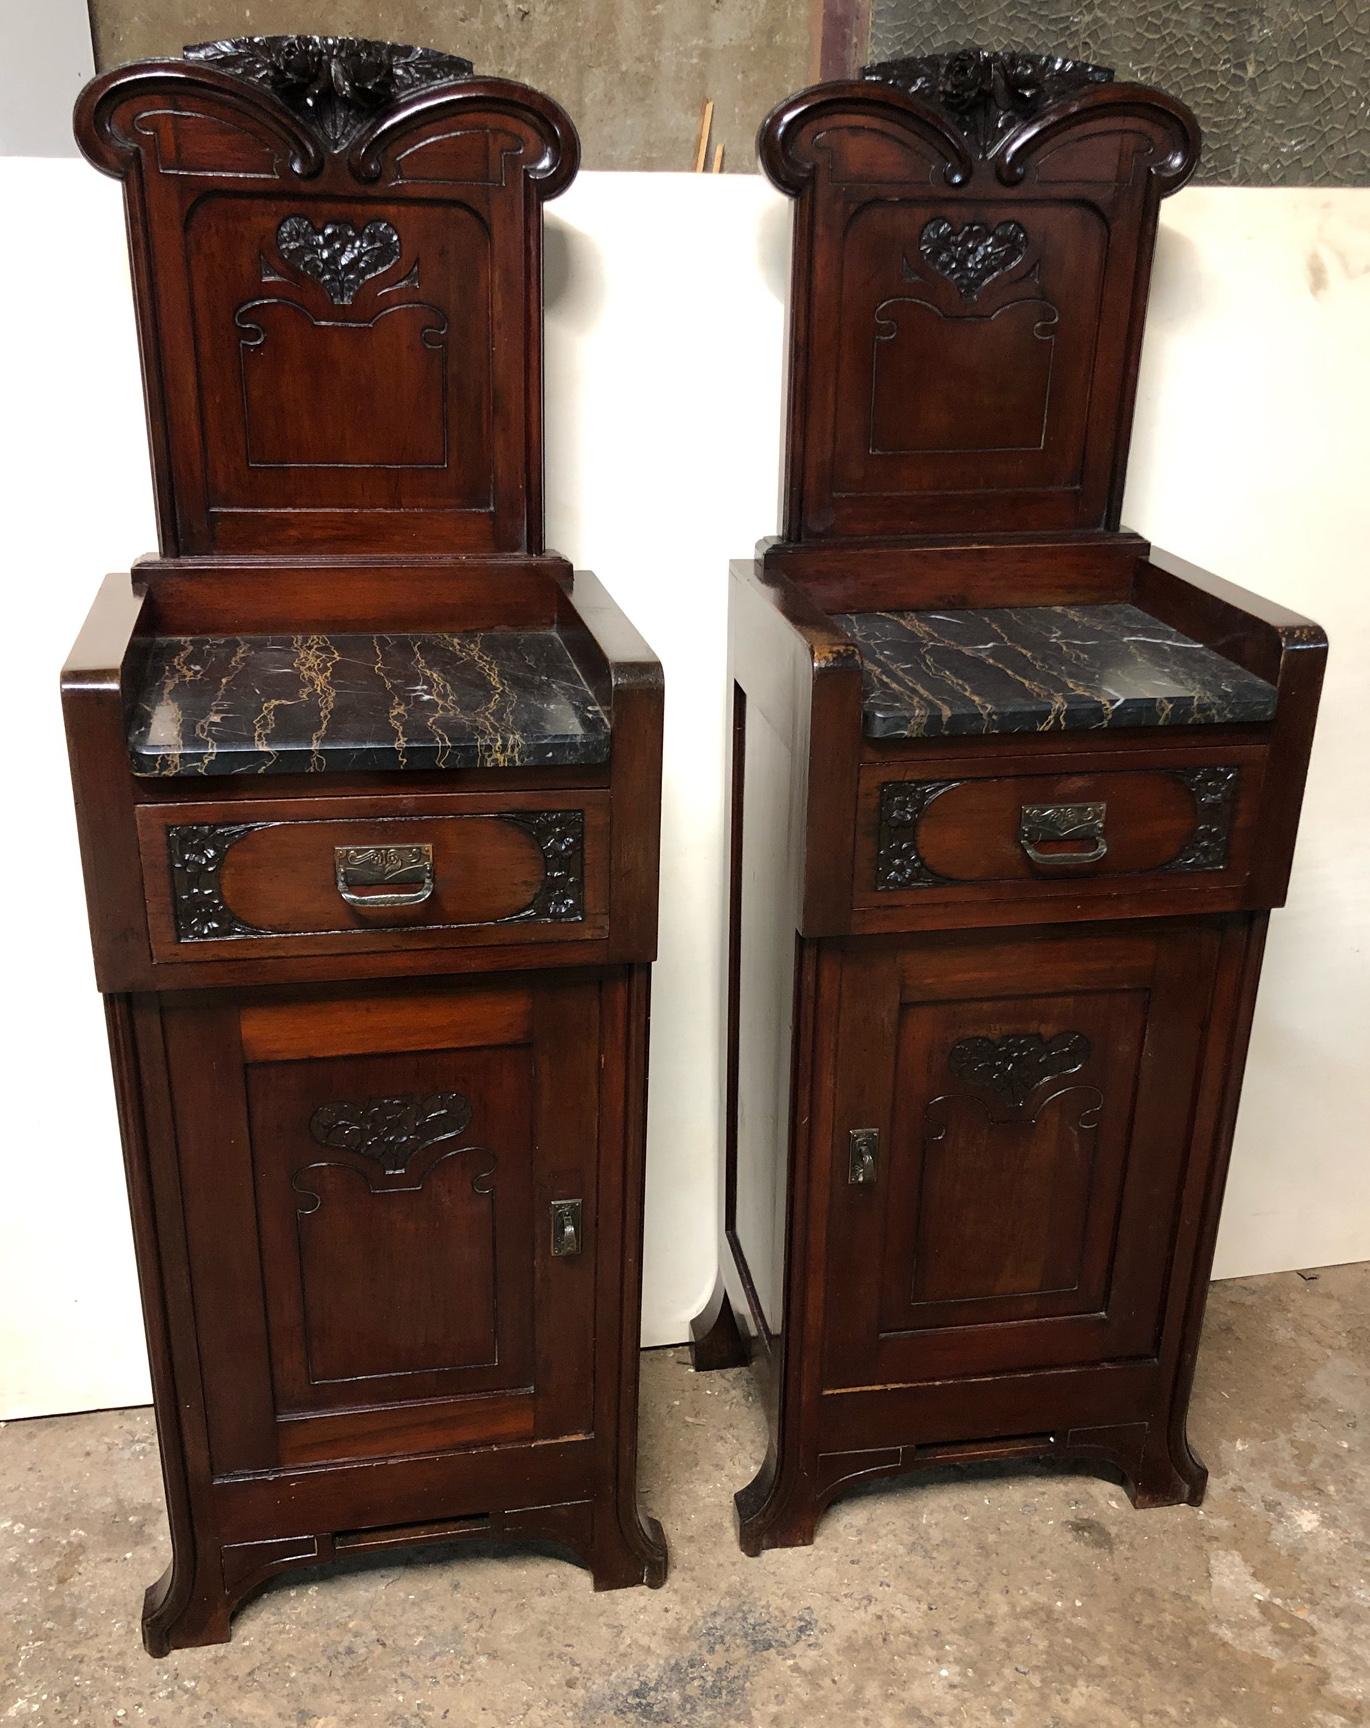 Pair of original 1900s Italian Art Nouveau nightstands in mahogany with original Portoro marble set. 
The maximum height is 130 cm. while to marble 86 cm.
They are left and right.
The nightstands are very elegant and important.
The carved parts